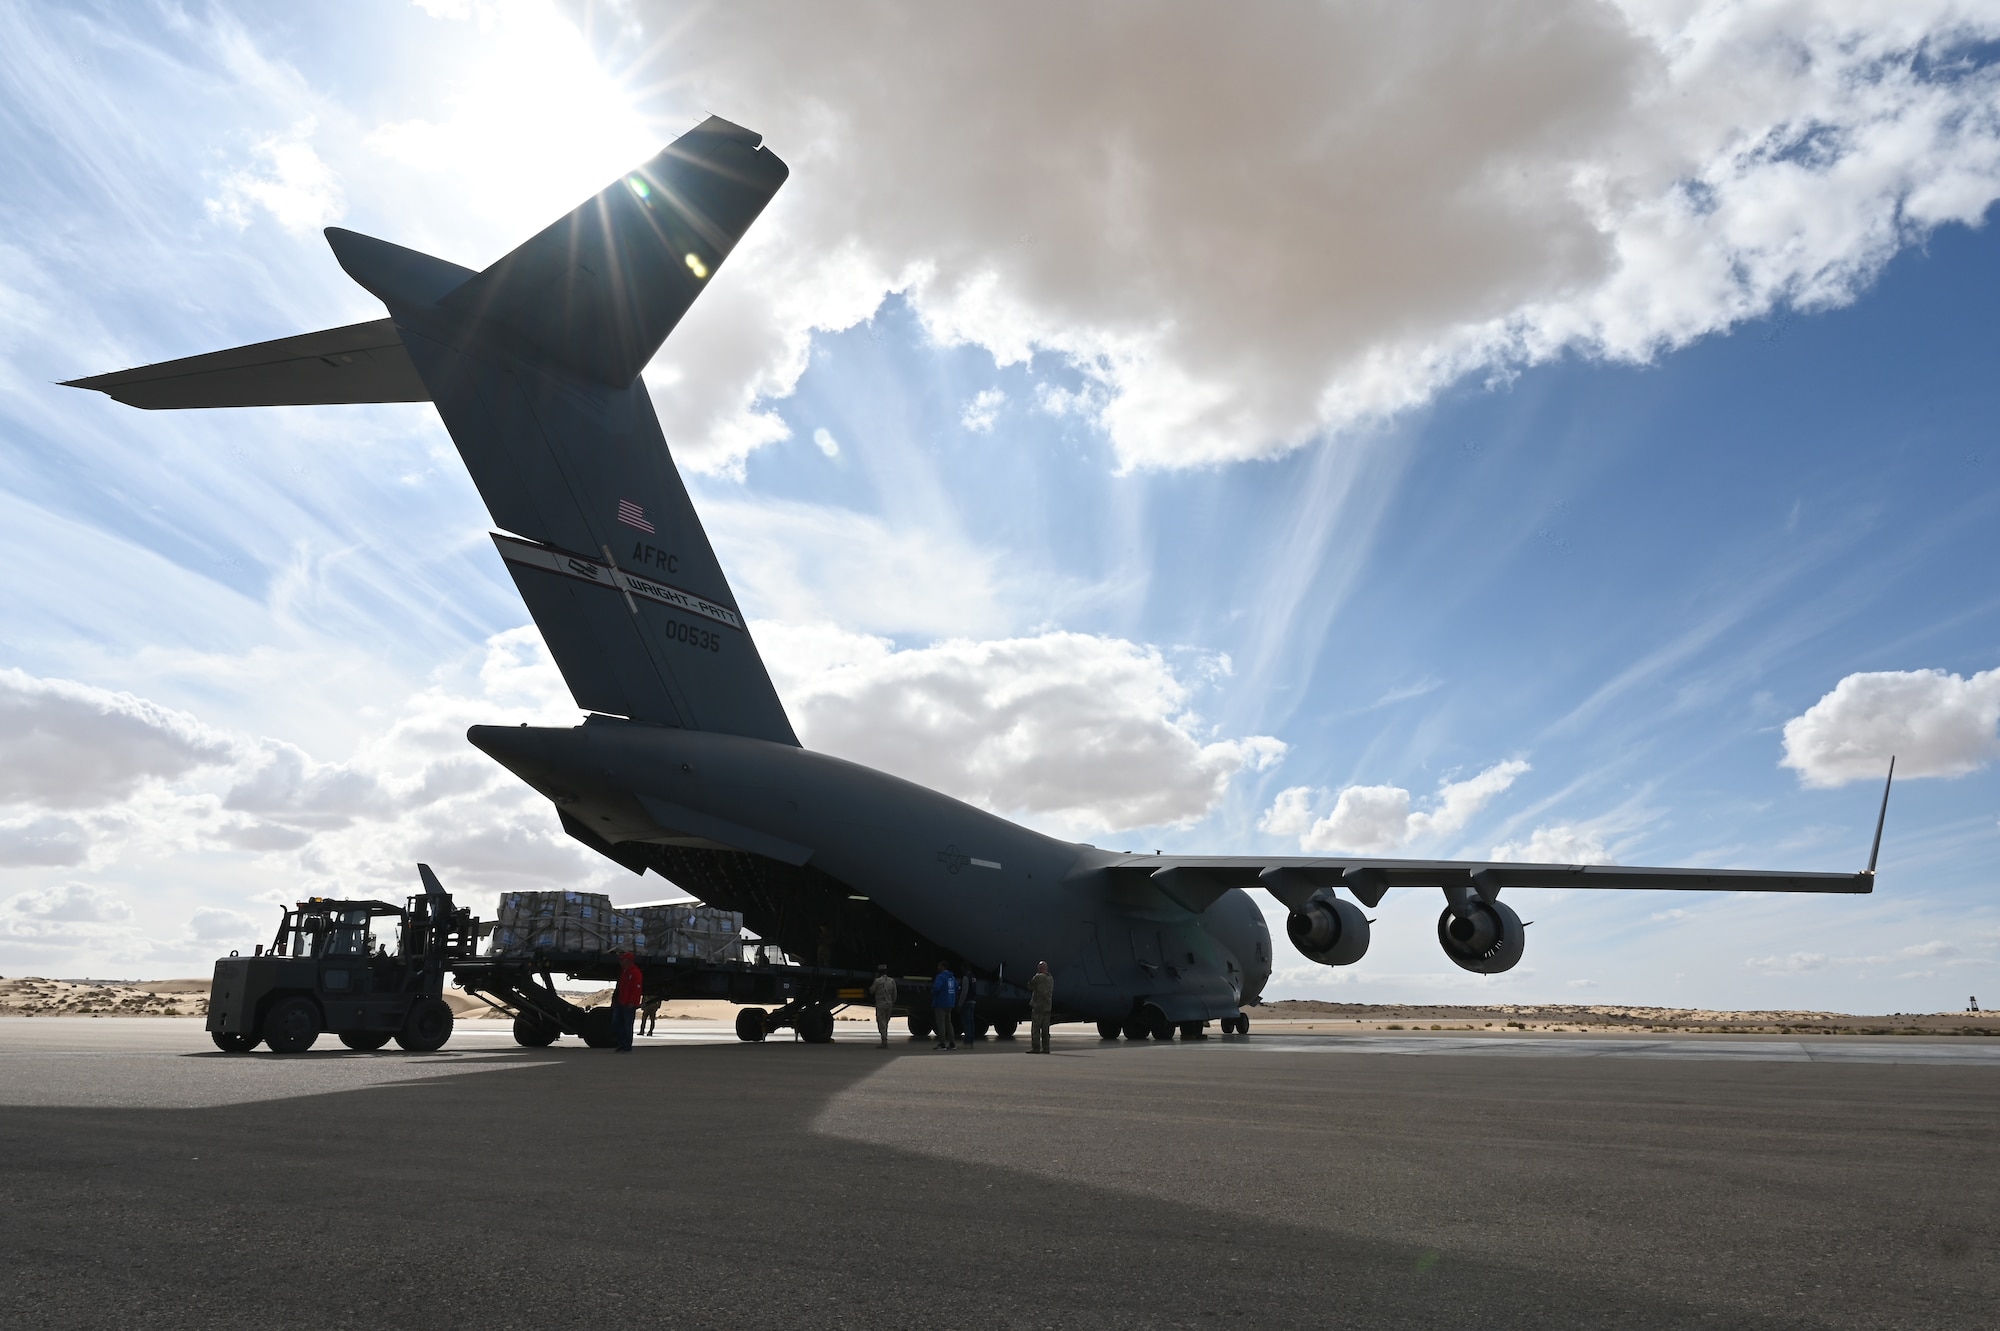 The U.S. Agency for International Development utilizes U.S. Air Force airlift capabilities to transport humanitarian aid throughout the Middle East.